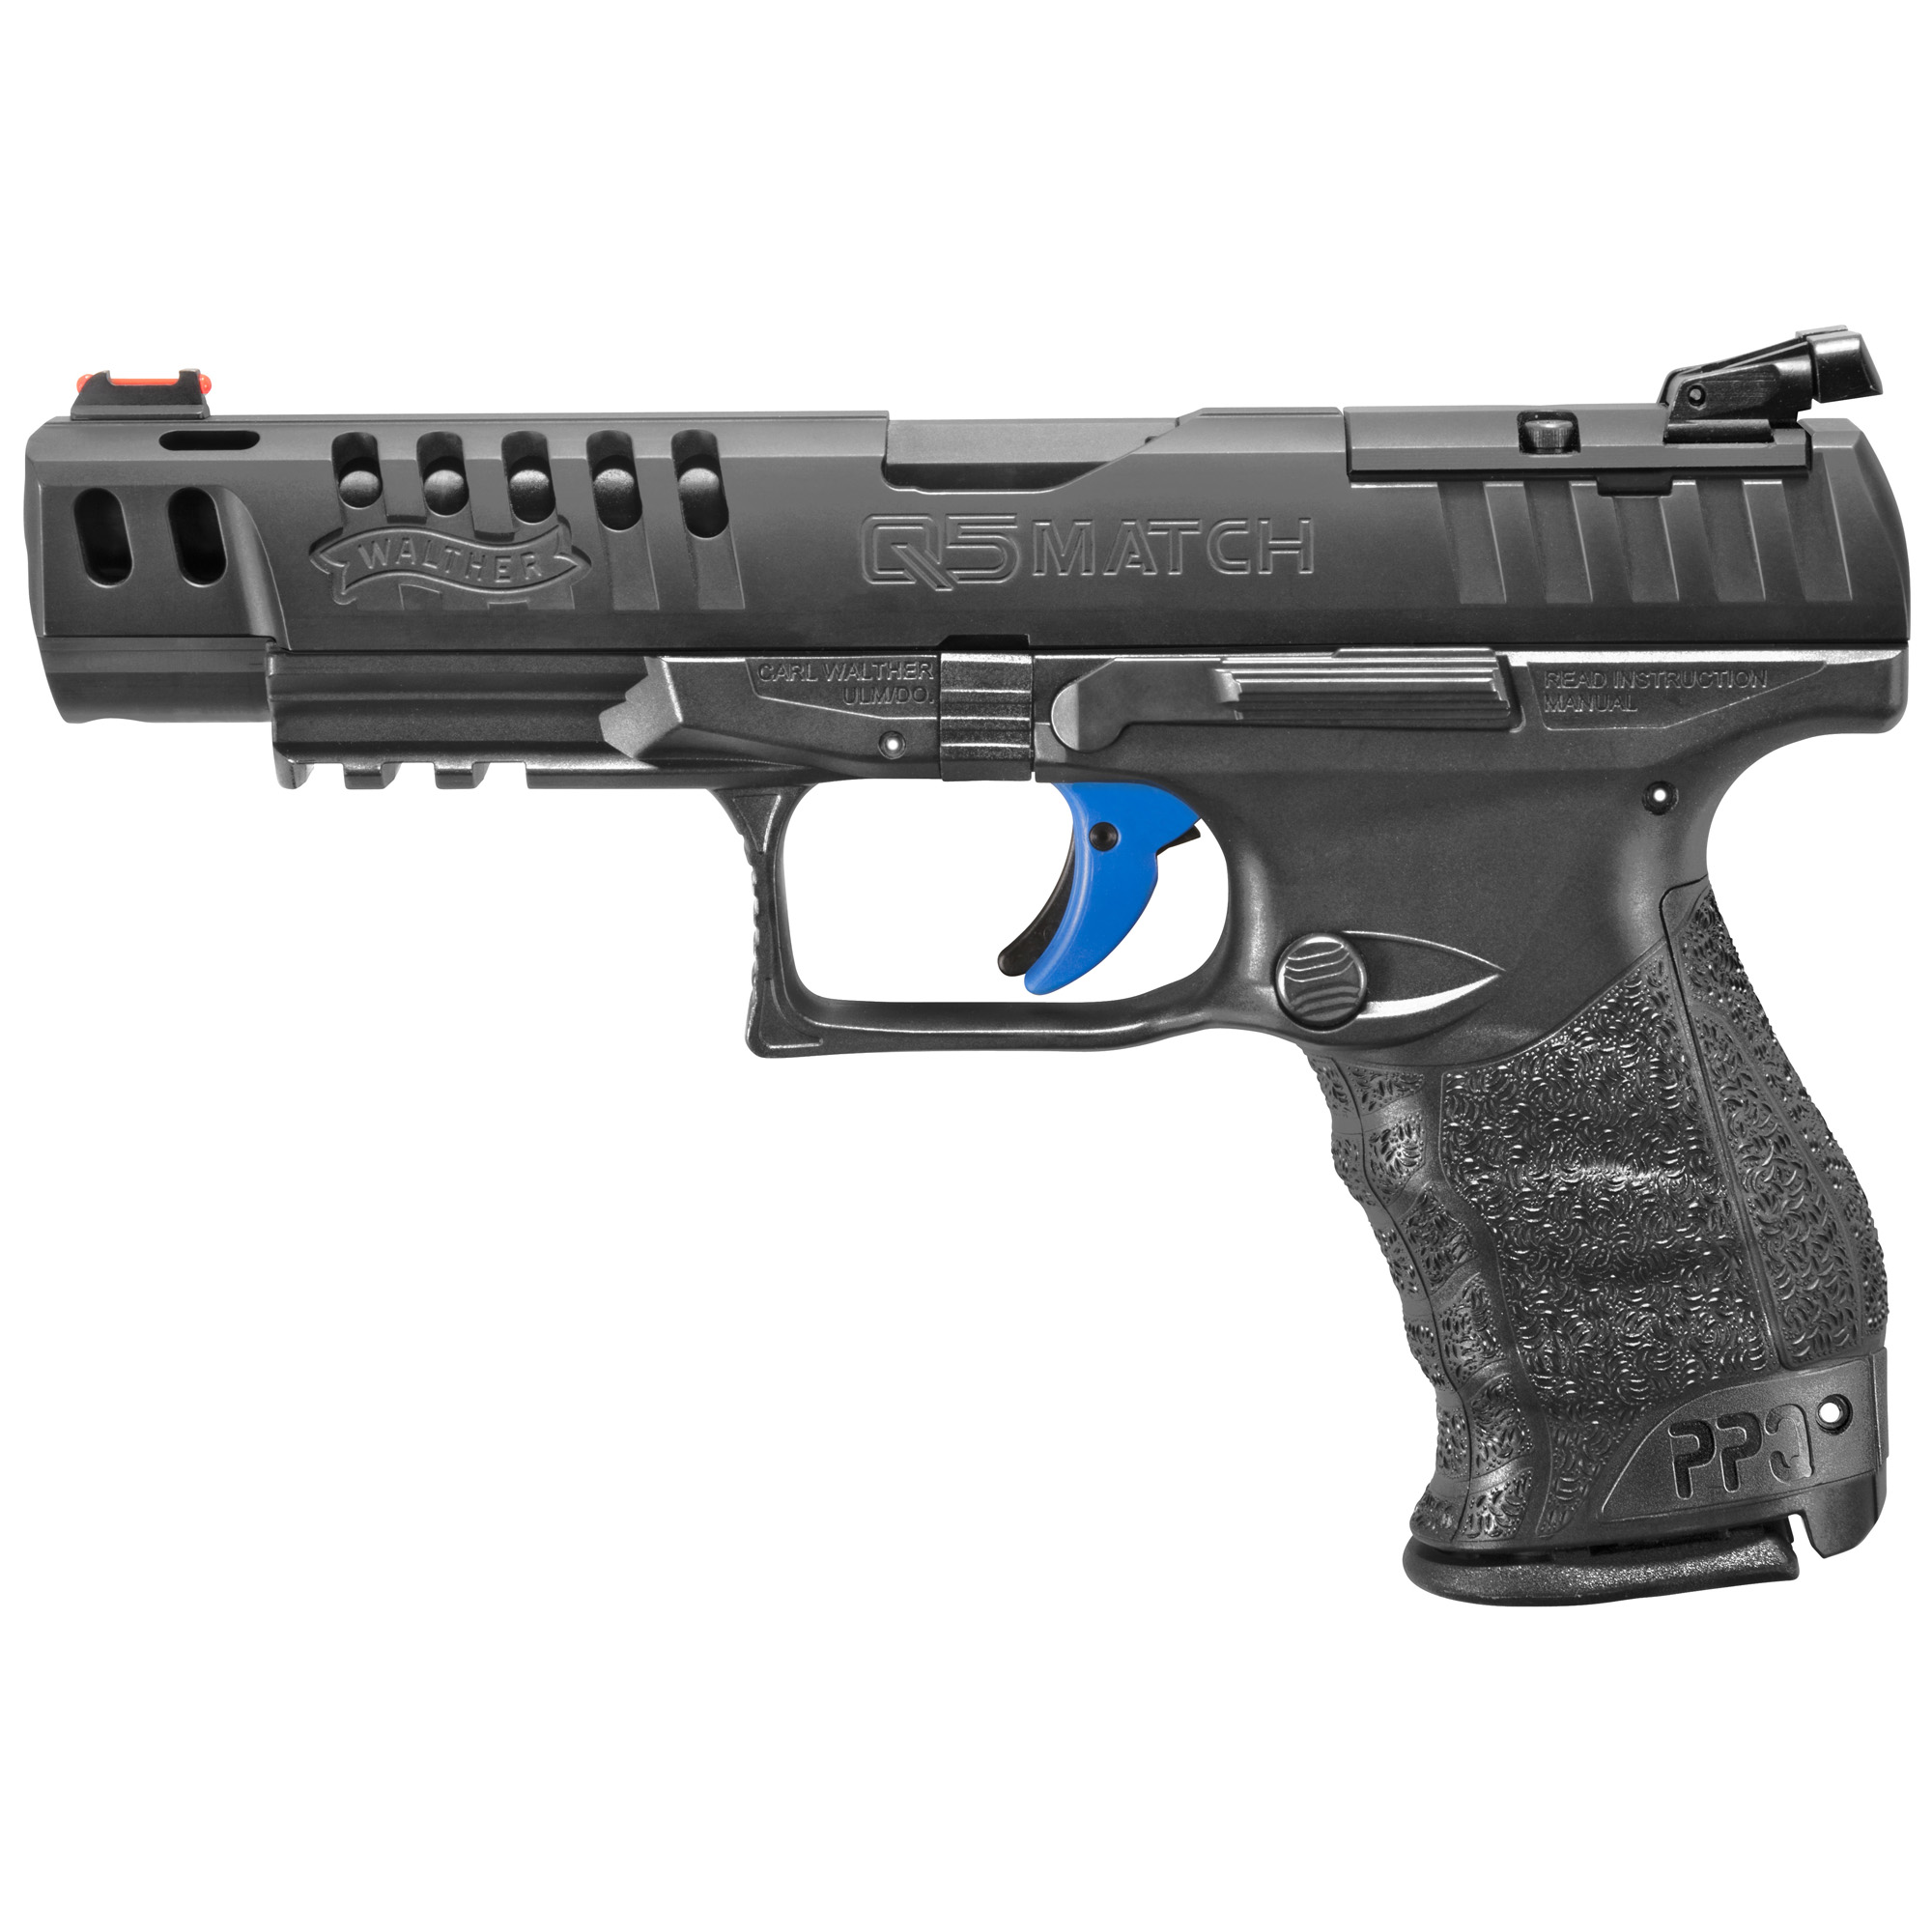 WALTHER Q5 MATCH 9MM 5 15RD BLK